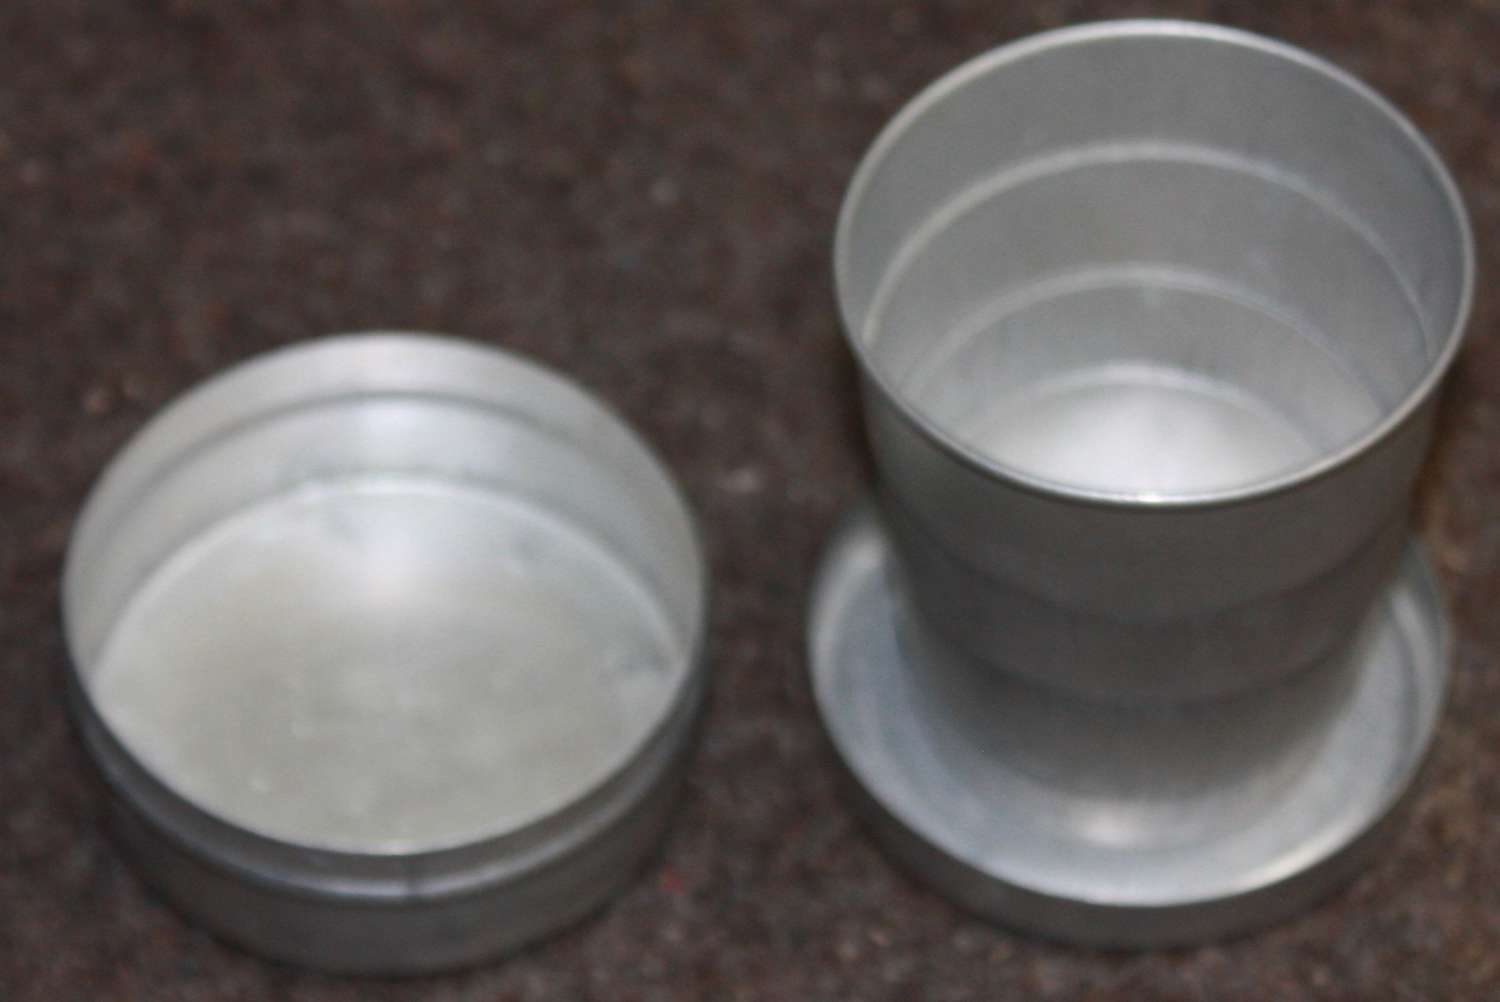 A PRIVATE PURCHASE ALLOY COLLAPSIBLE CUP